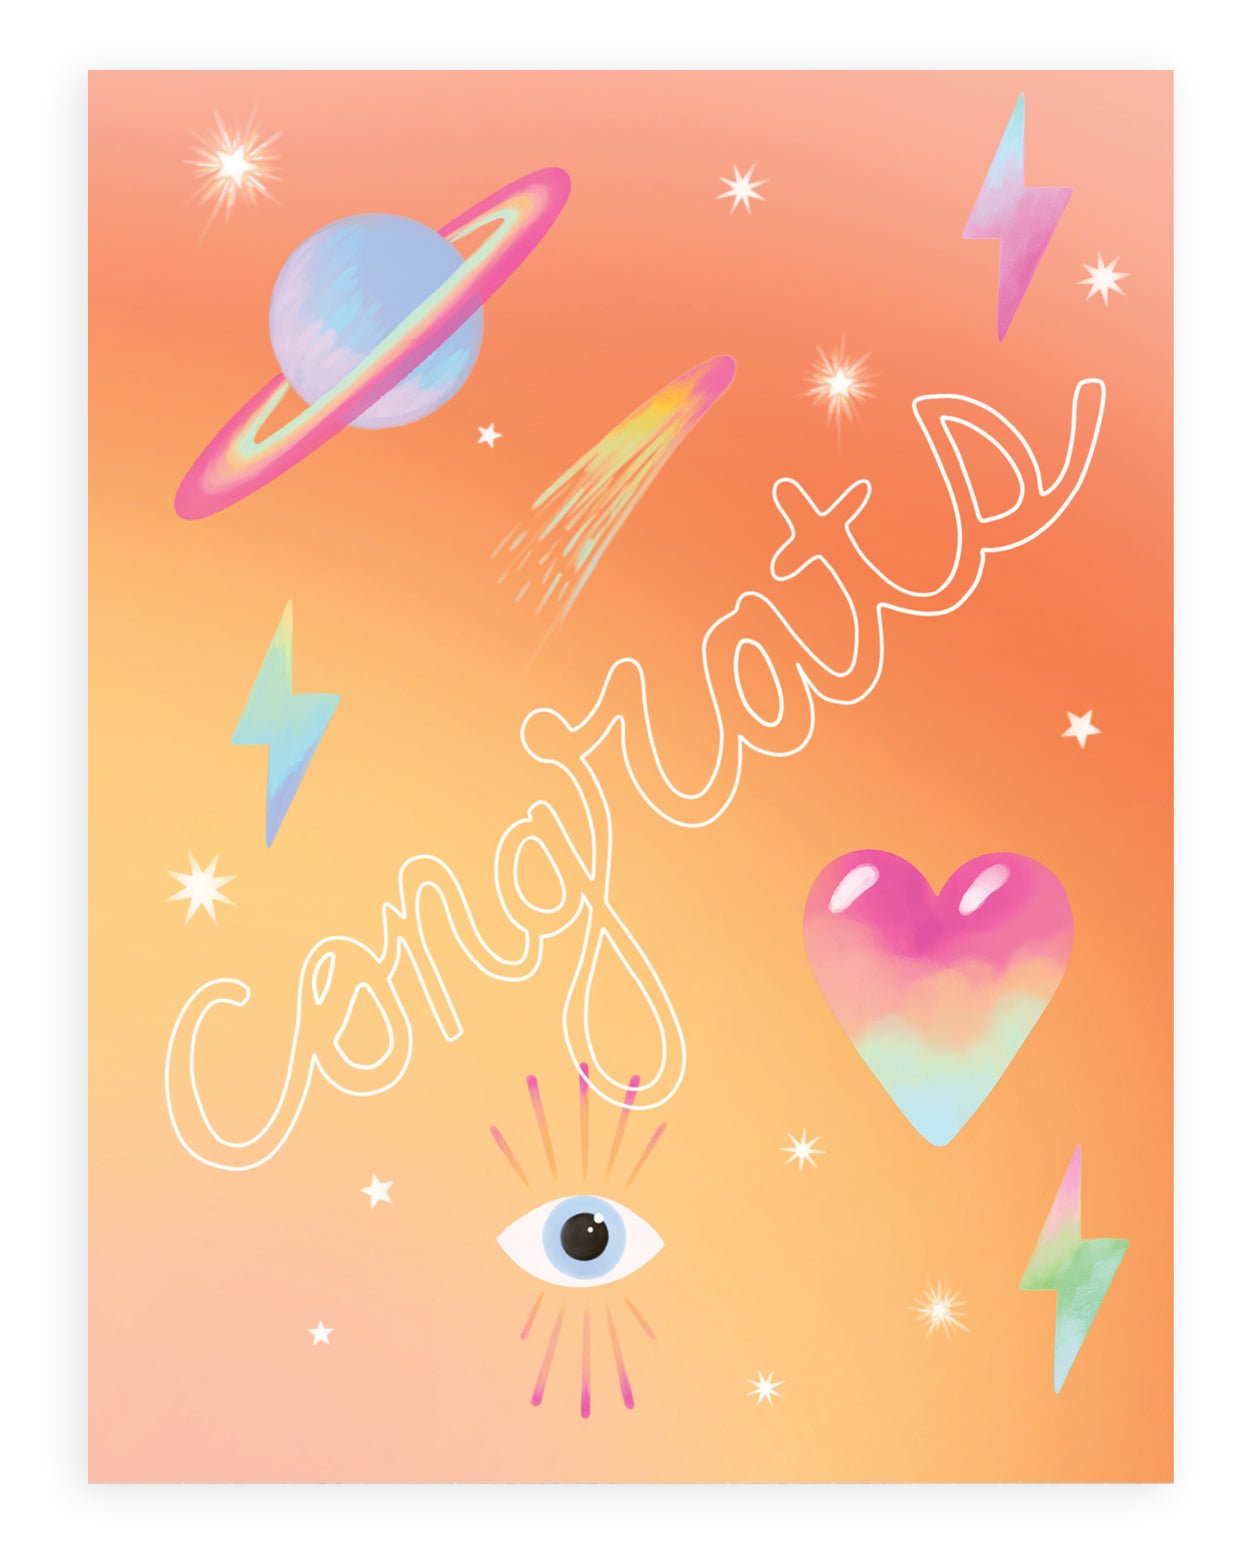 Greeting card with the word "Congrats" across the front in white hollow font with neon icons against an ombre orange background. Shown on a white background.